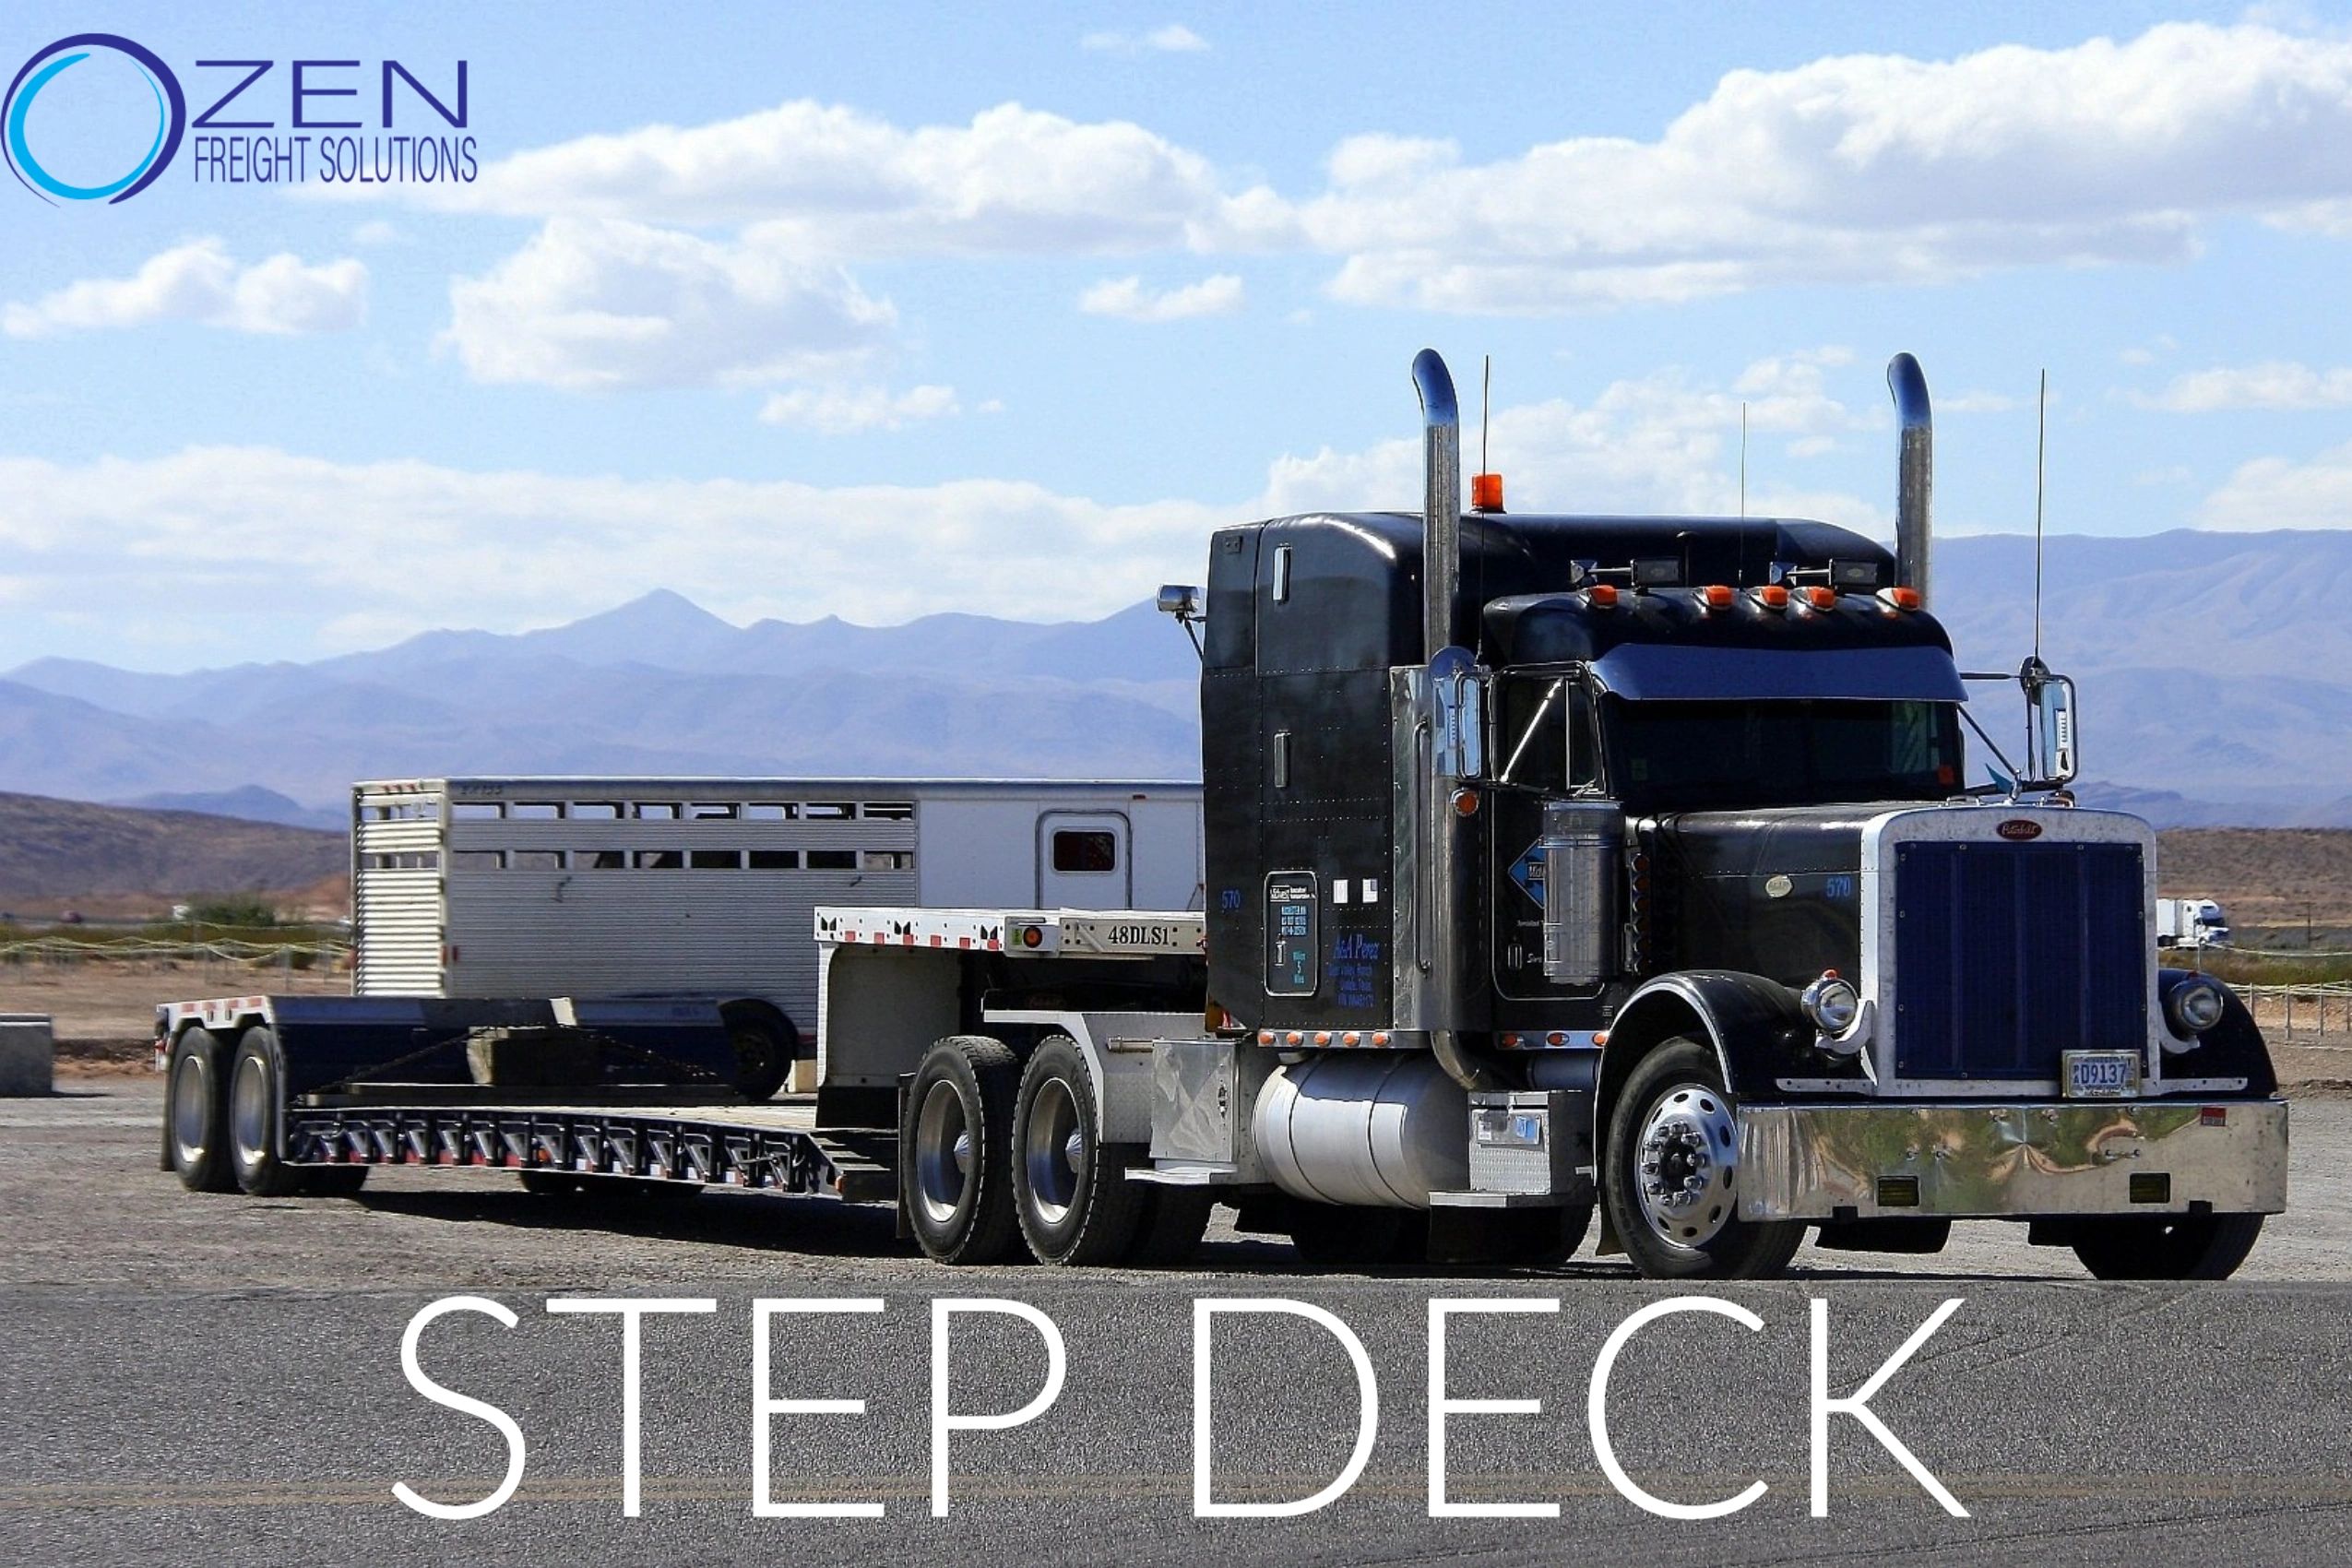 Step-deck truck in front of a blue sky